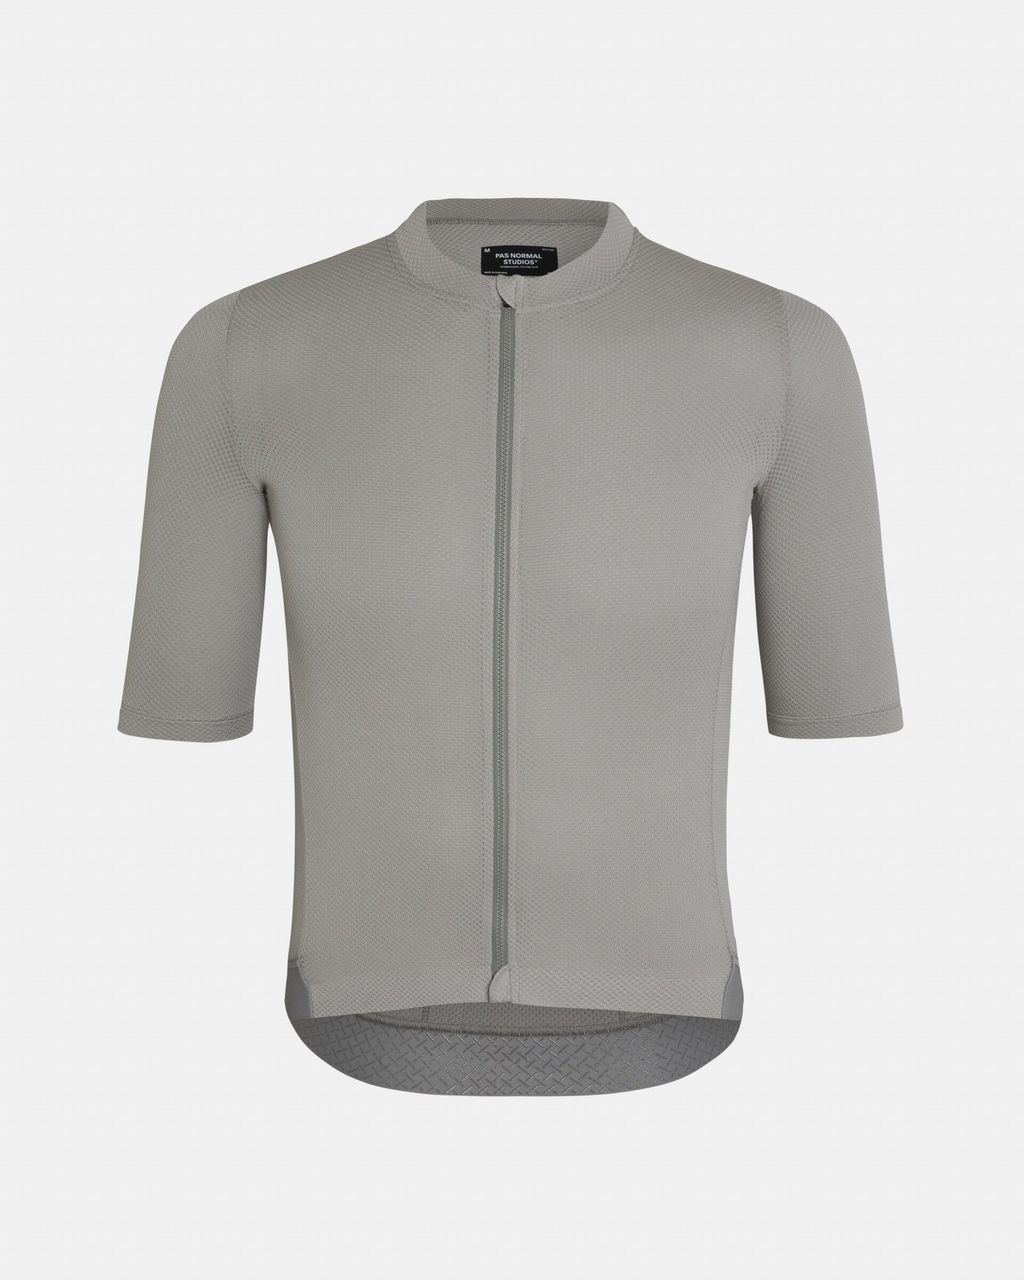 Mens-Solitude-Mesh-Jersey_Light-Grey_Front-pdp-page